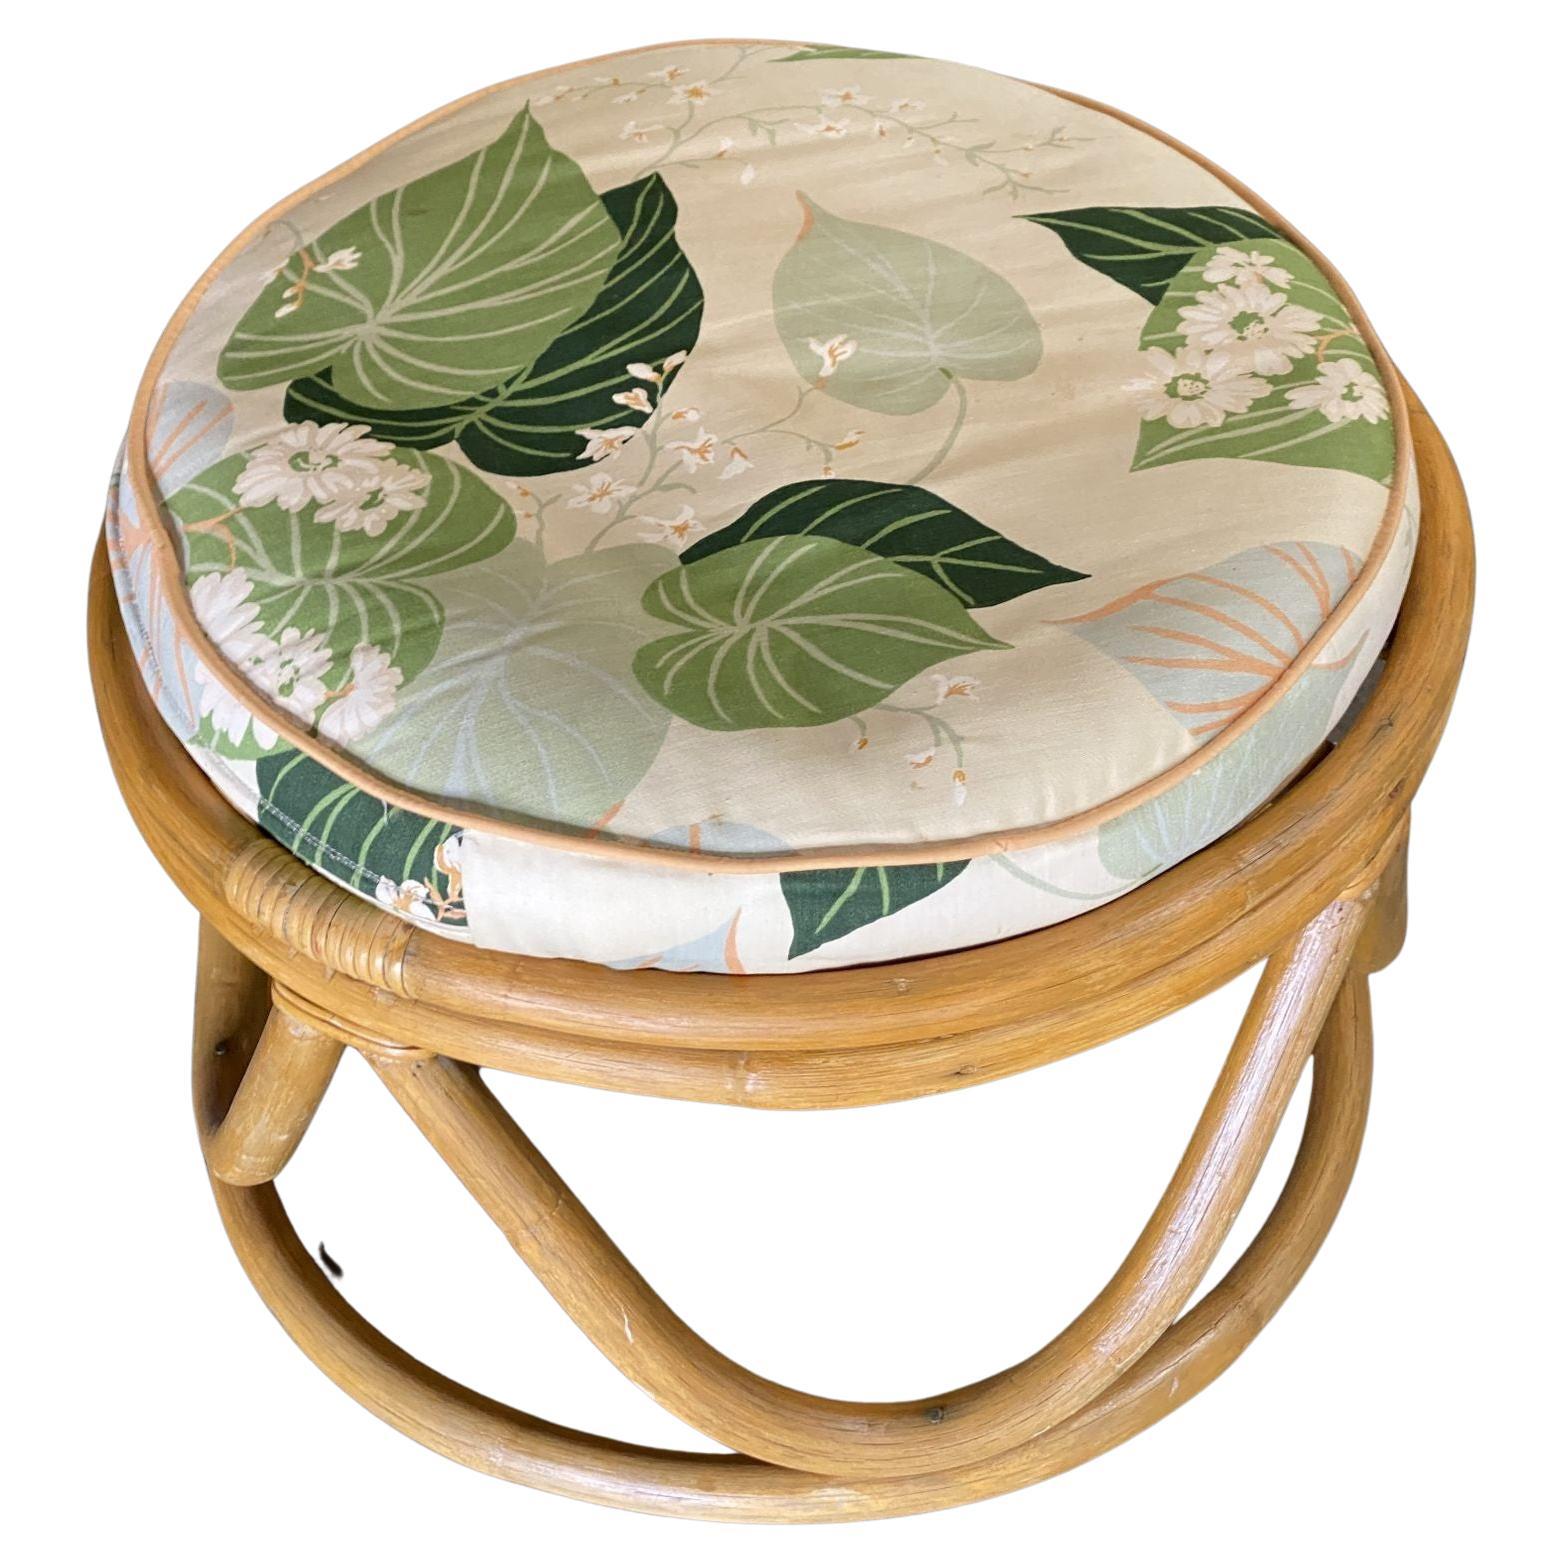 Restored Round Open Base Ottoman Stool with Bark Cloth Covering